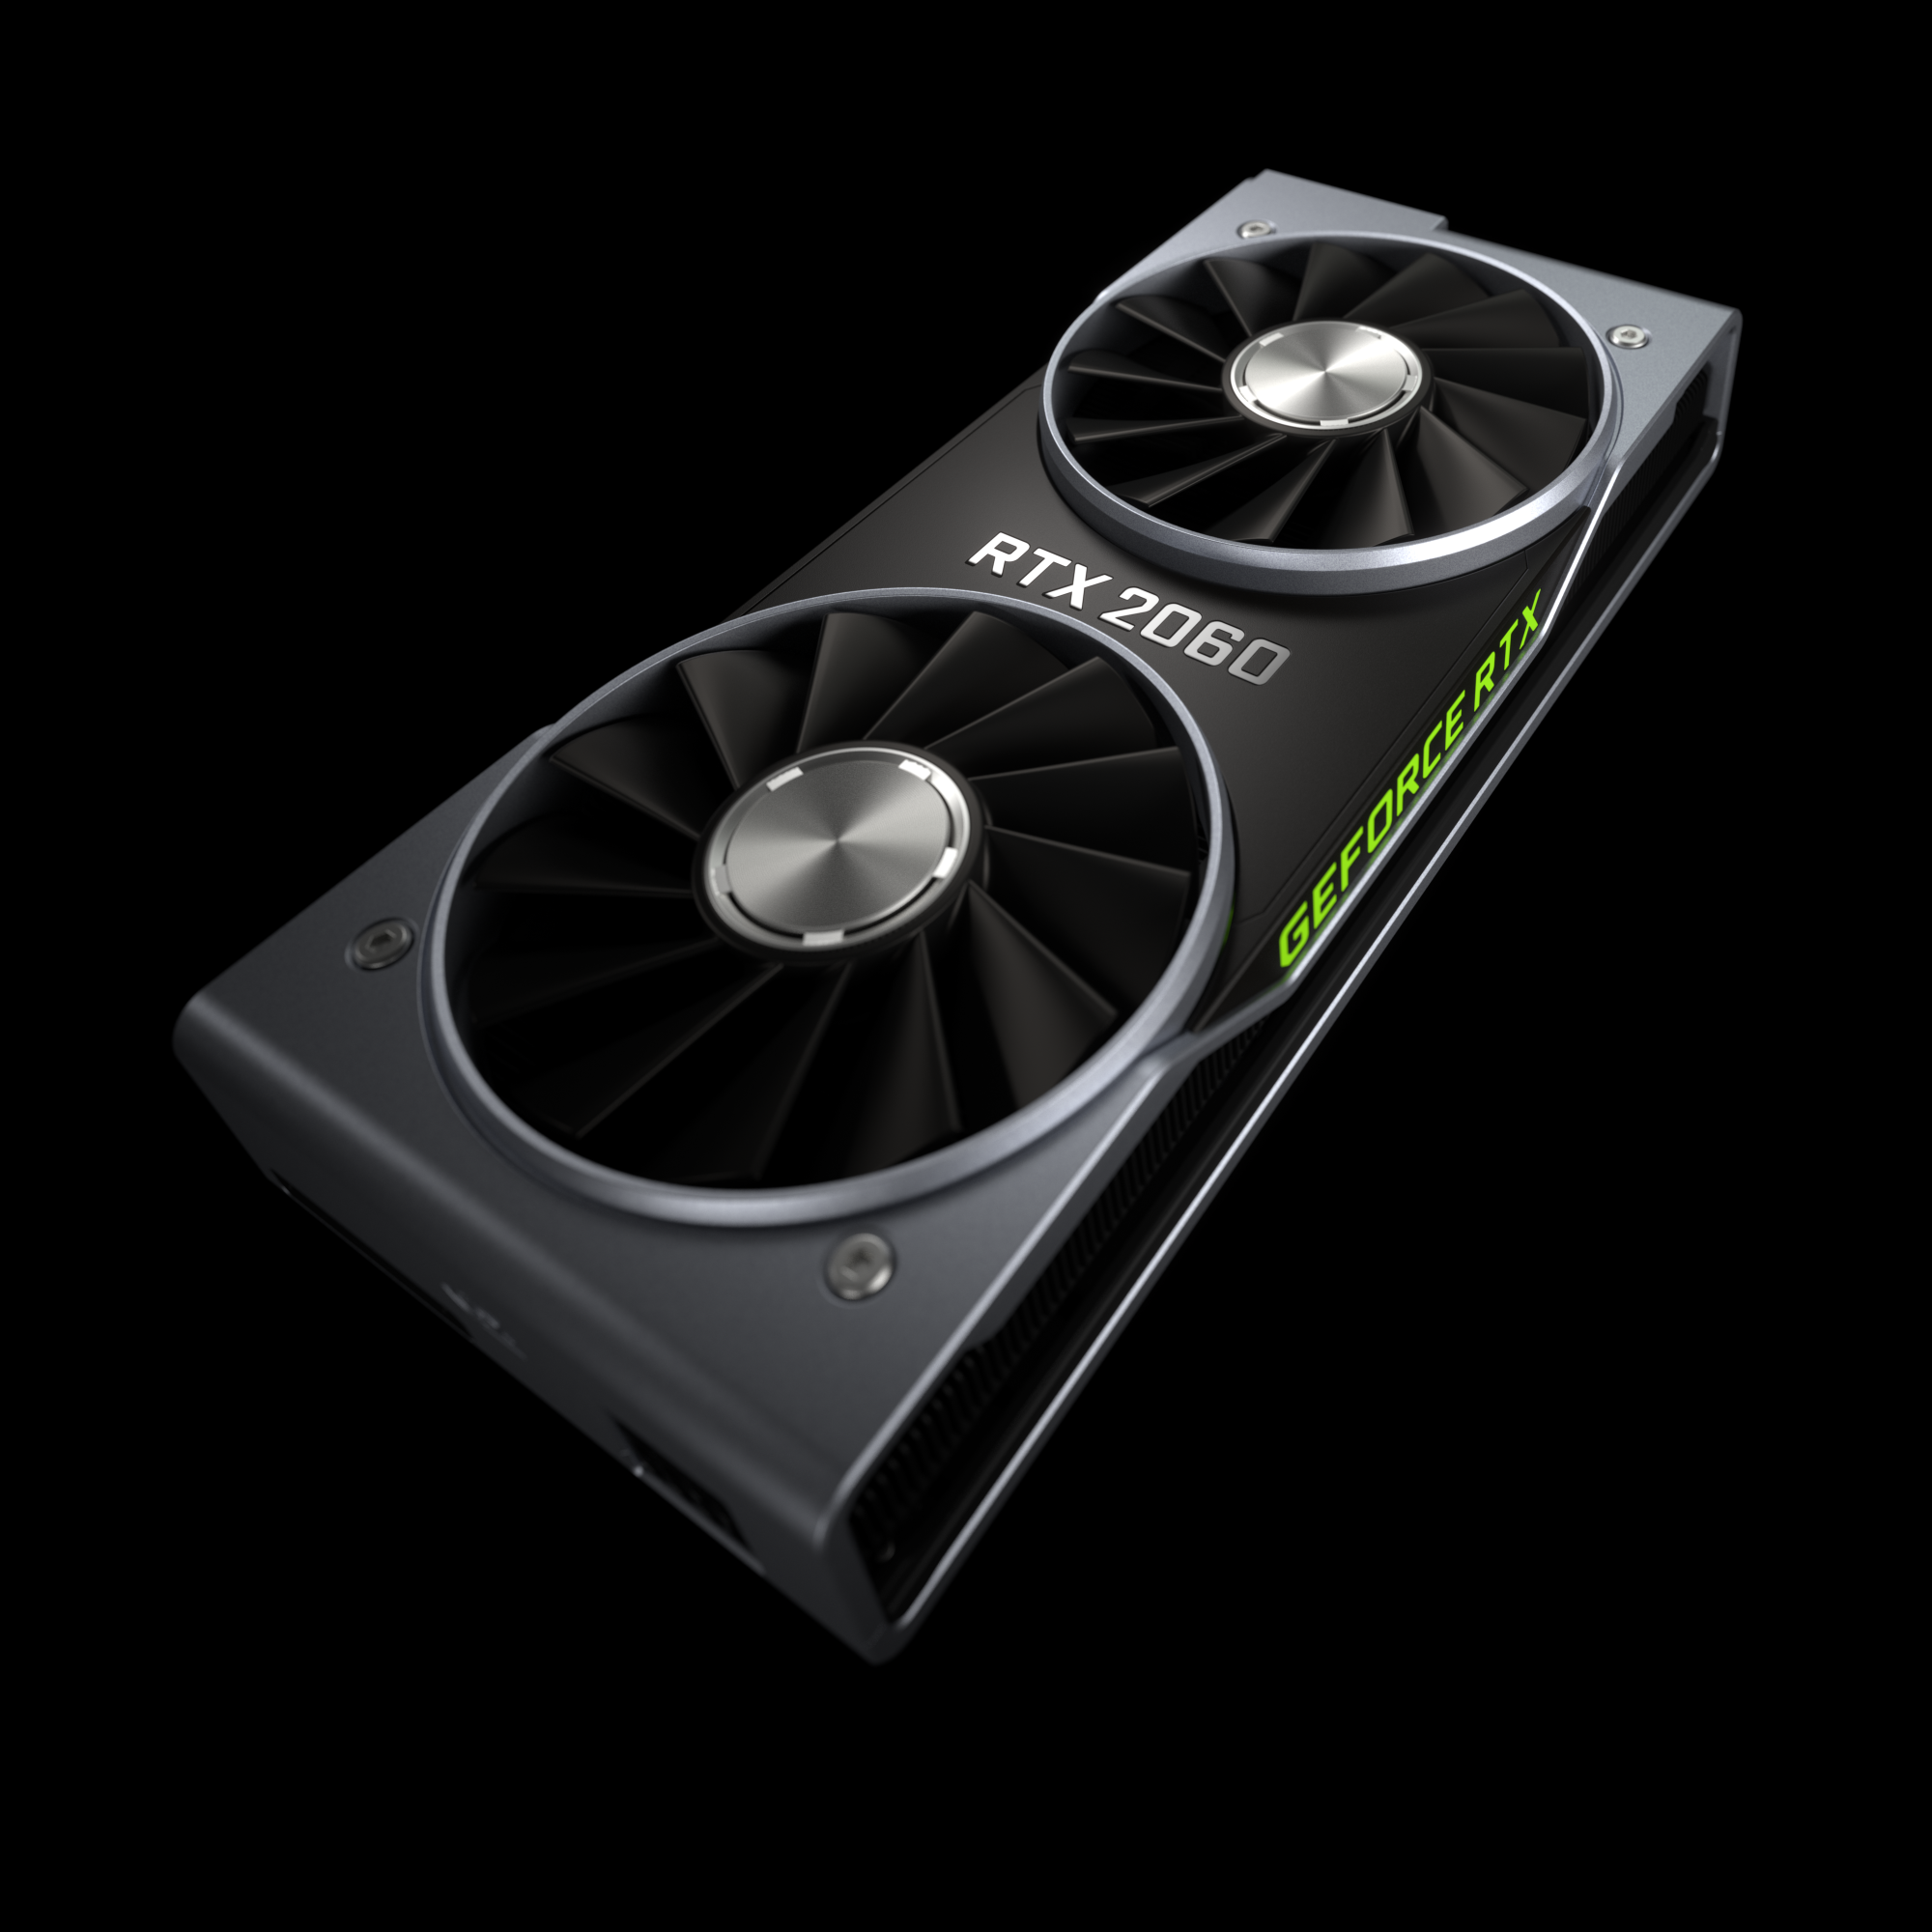 Image for Nvidia GeForce RTX 2060 review: ray-tracing, DLSS and solid performance in a more affordable package